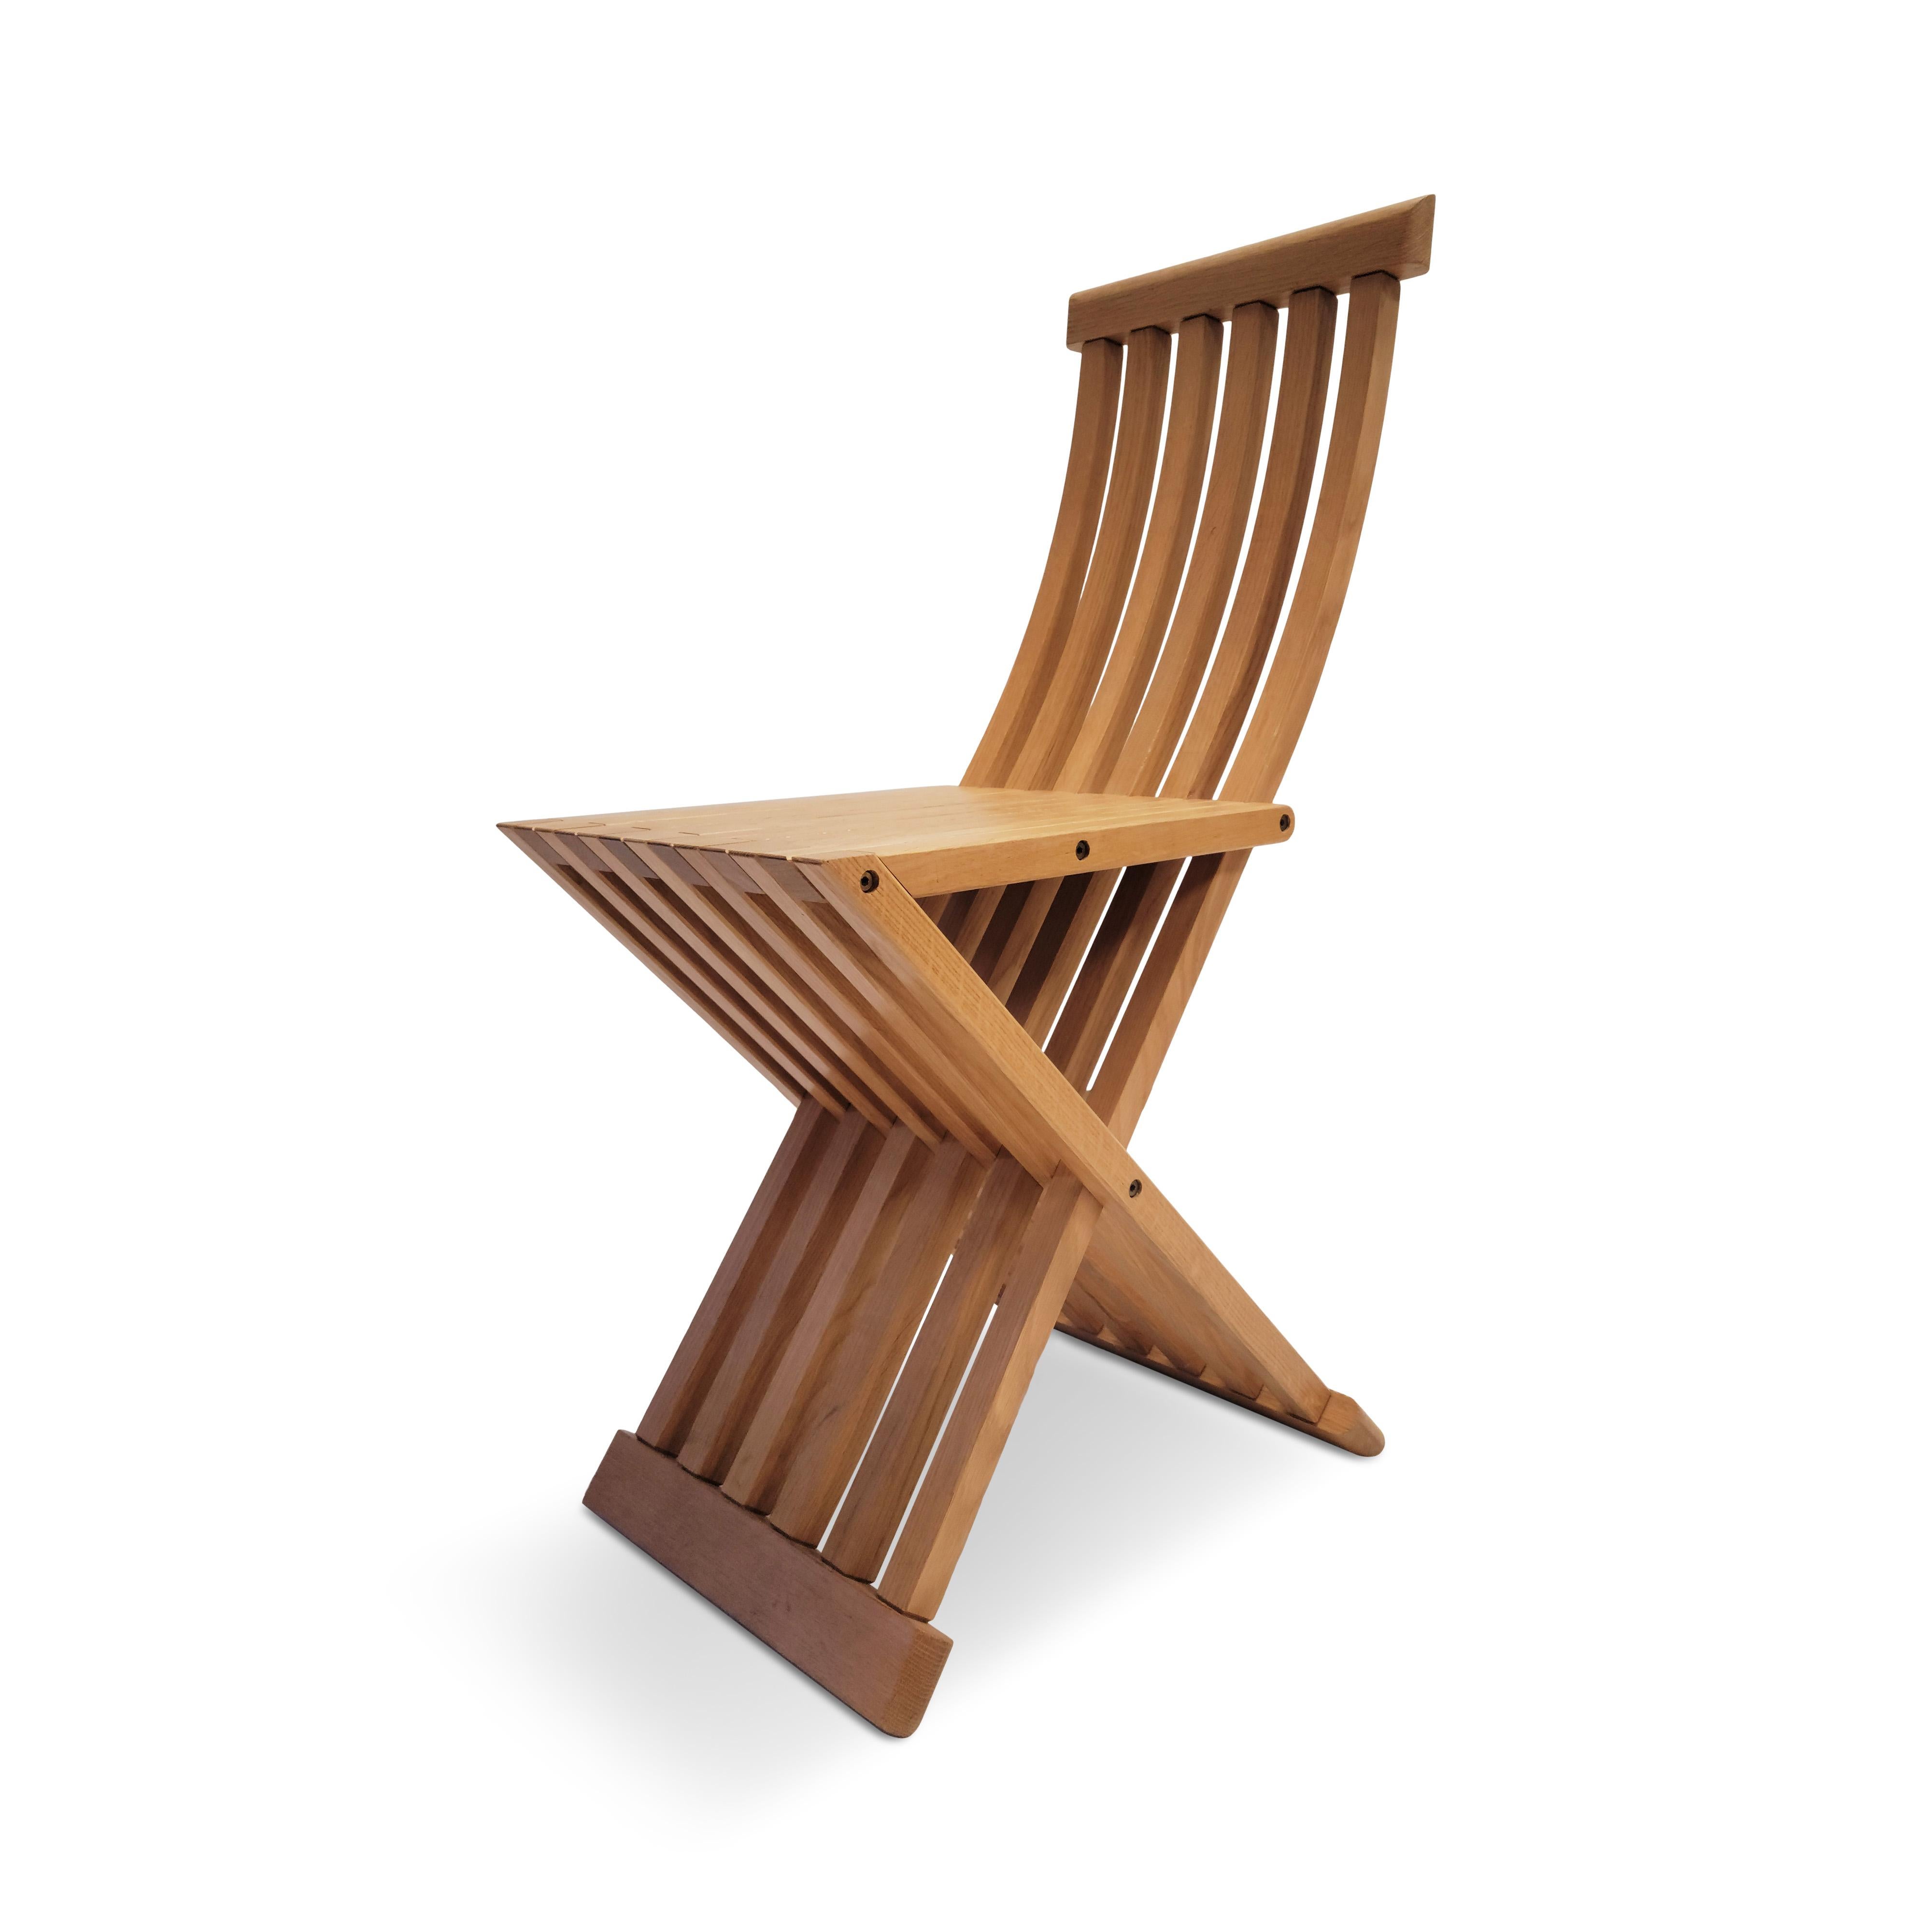 Considered an homage to Paolo Uccello, a 15th century painter and mathematician, and manufactured by Simon Gavina in Italy, the Tomasa chair is a simple and beautiful design. Constructed of wax finished curved oak slats forming the back and seat, as